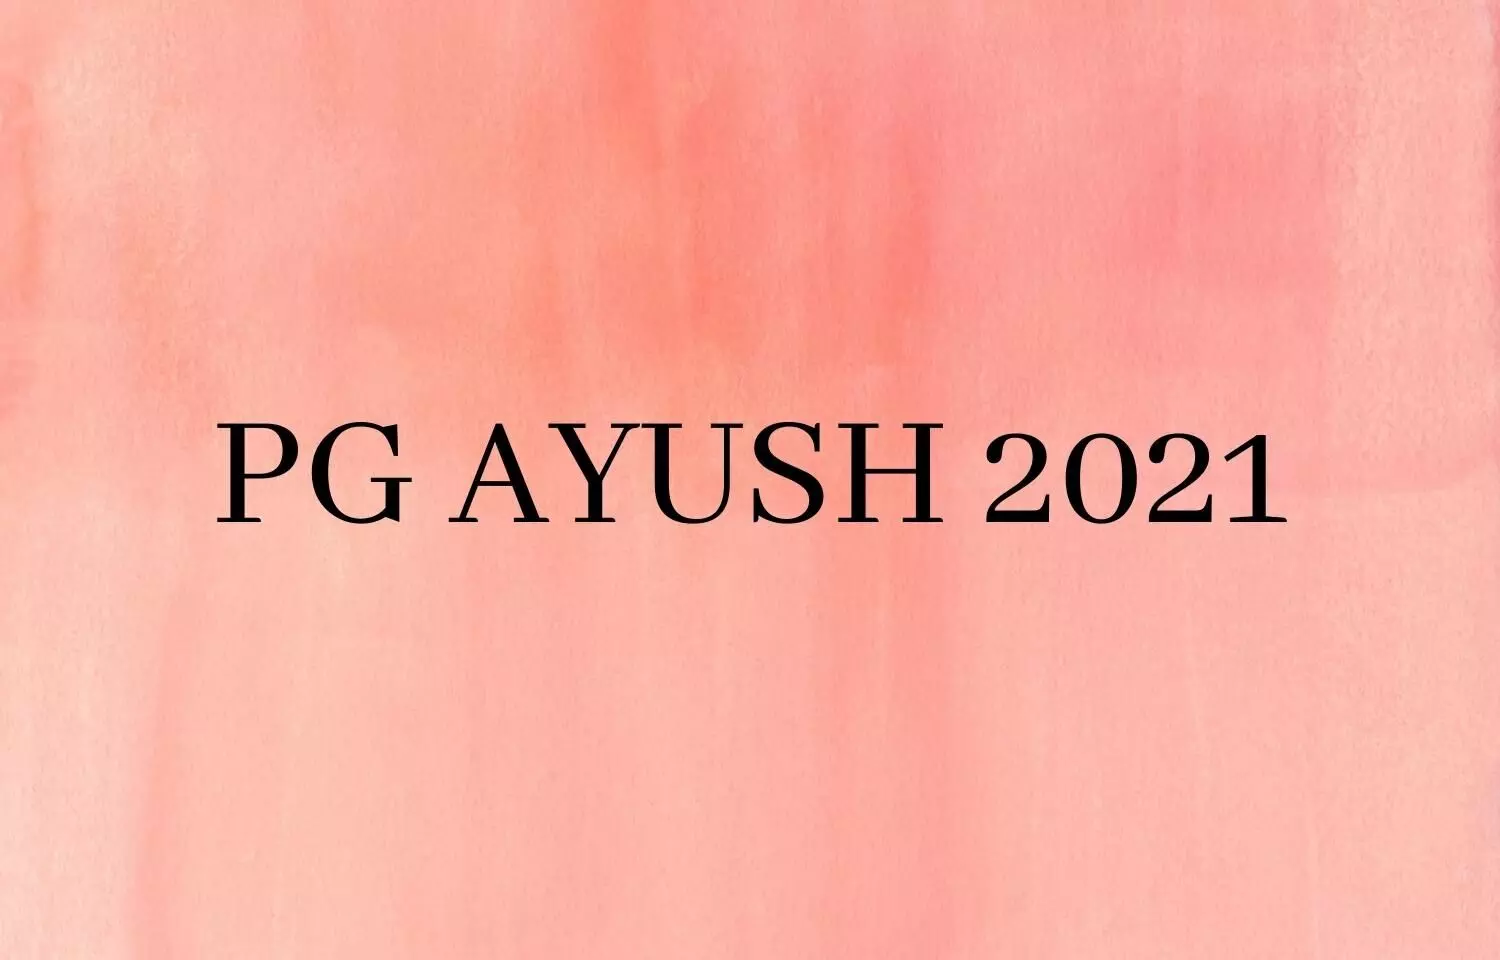 KEA releases Schedule for 2nd Round of PG AYUSH 2021 admissions, Details